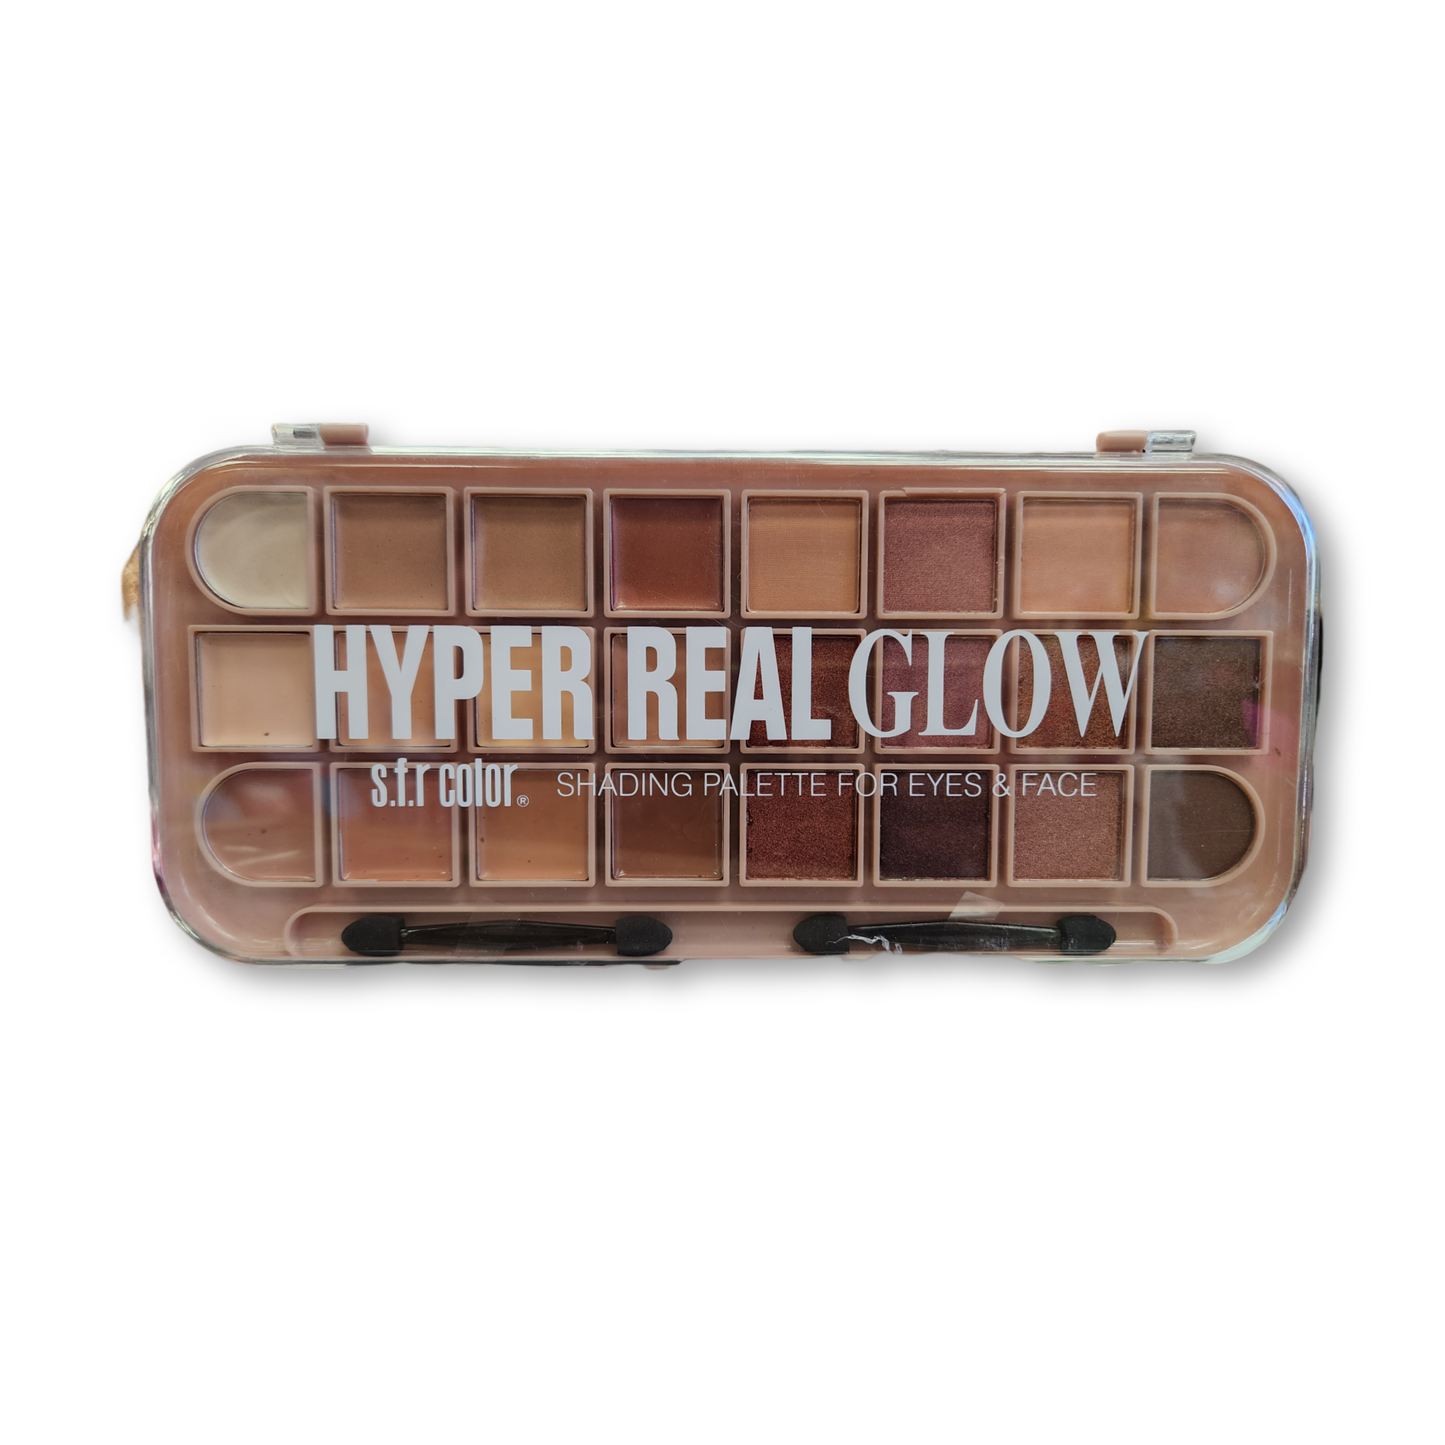 SFR Color Hyper Real Glow Shading Palette For Face & Eyes 12 Eyeshadow 4 Highlighter 8 Concealer